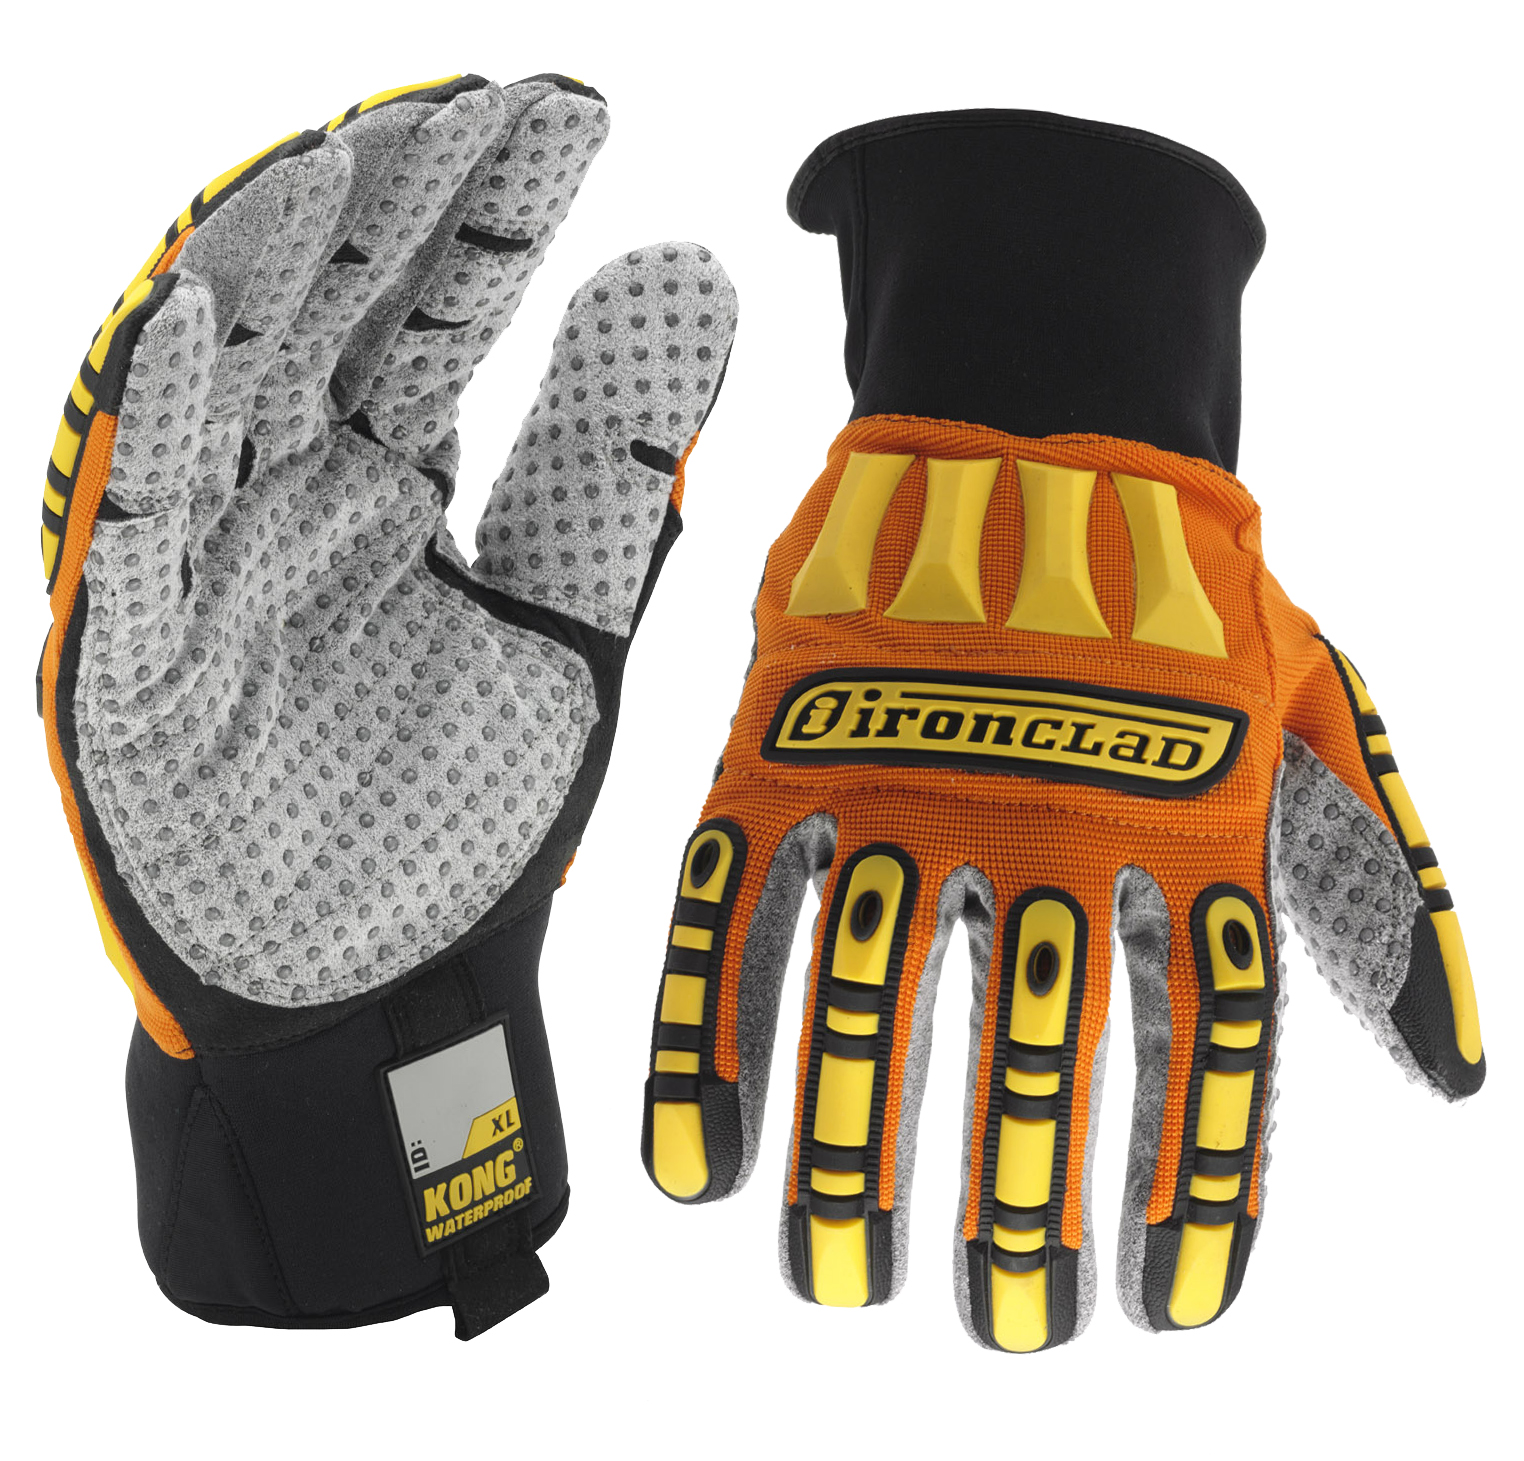 Ironclad's KONG Impact Protection Gloves